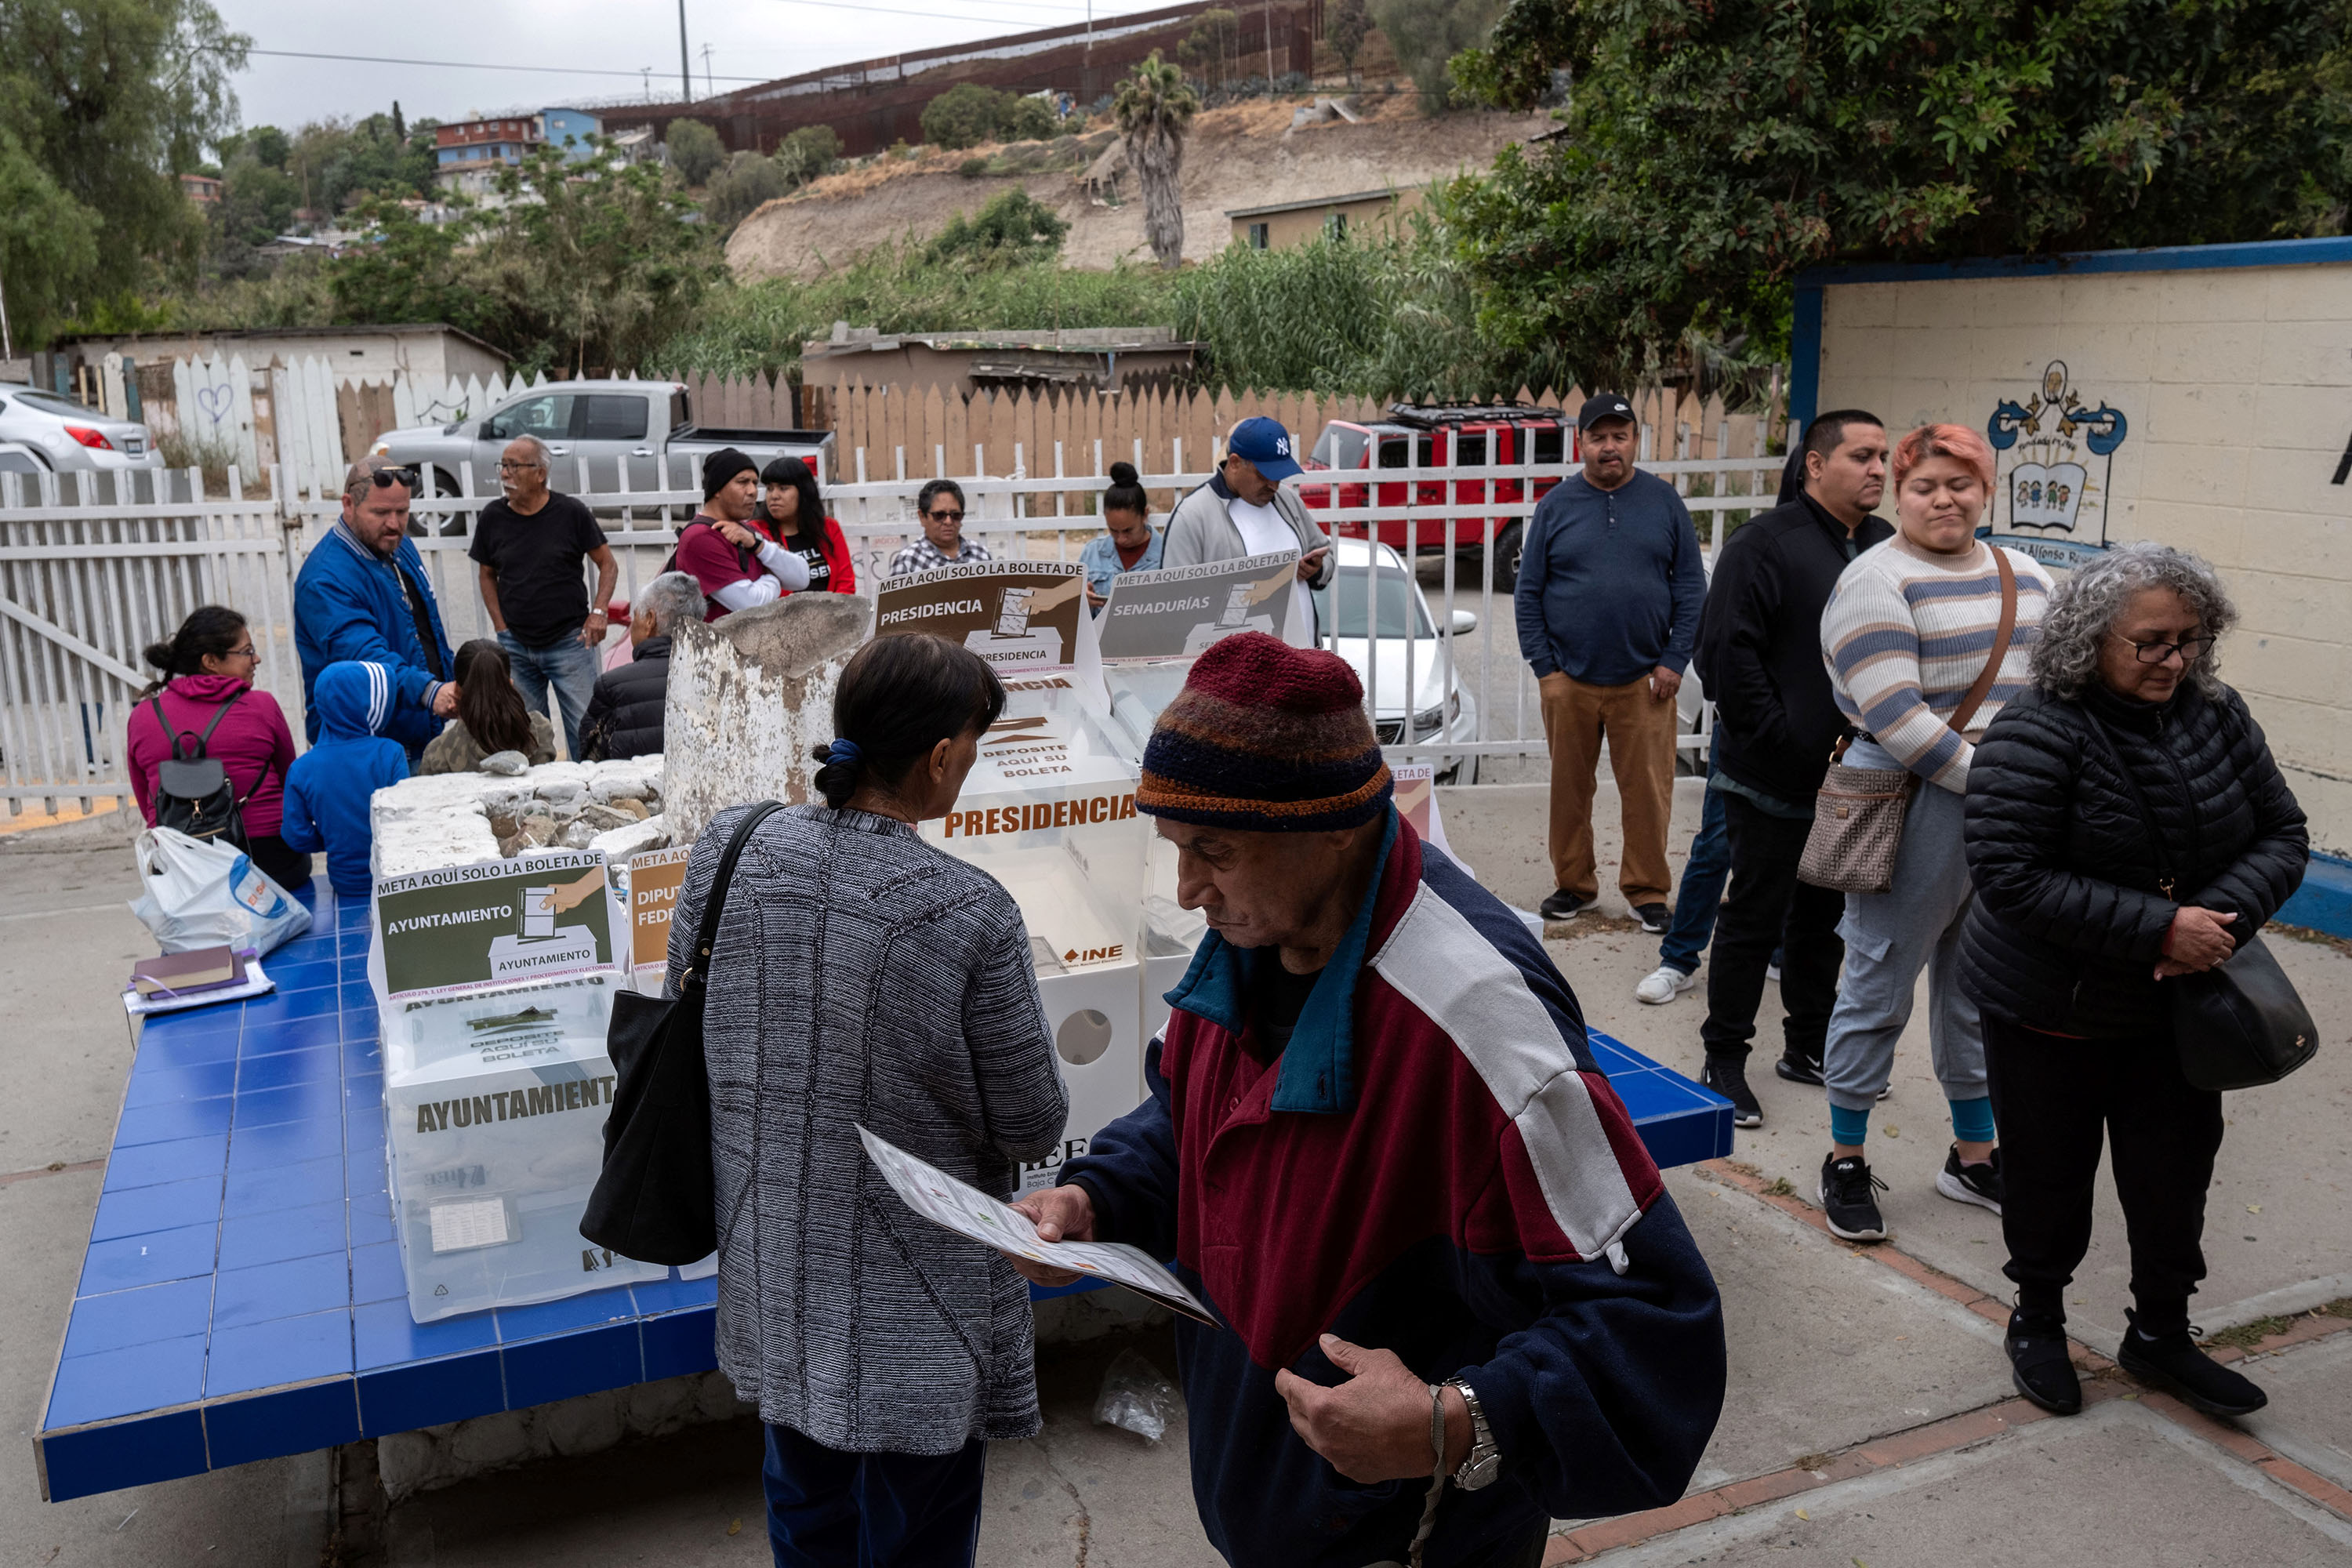 People queue to vote at a polling station in Colonia Libertad, near the US-Mexico border in Tijuana, Mexico, on June 2. 